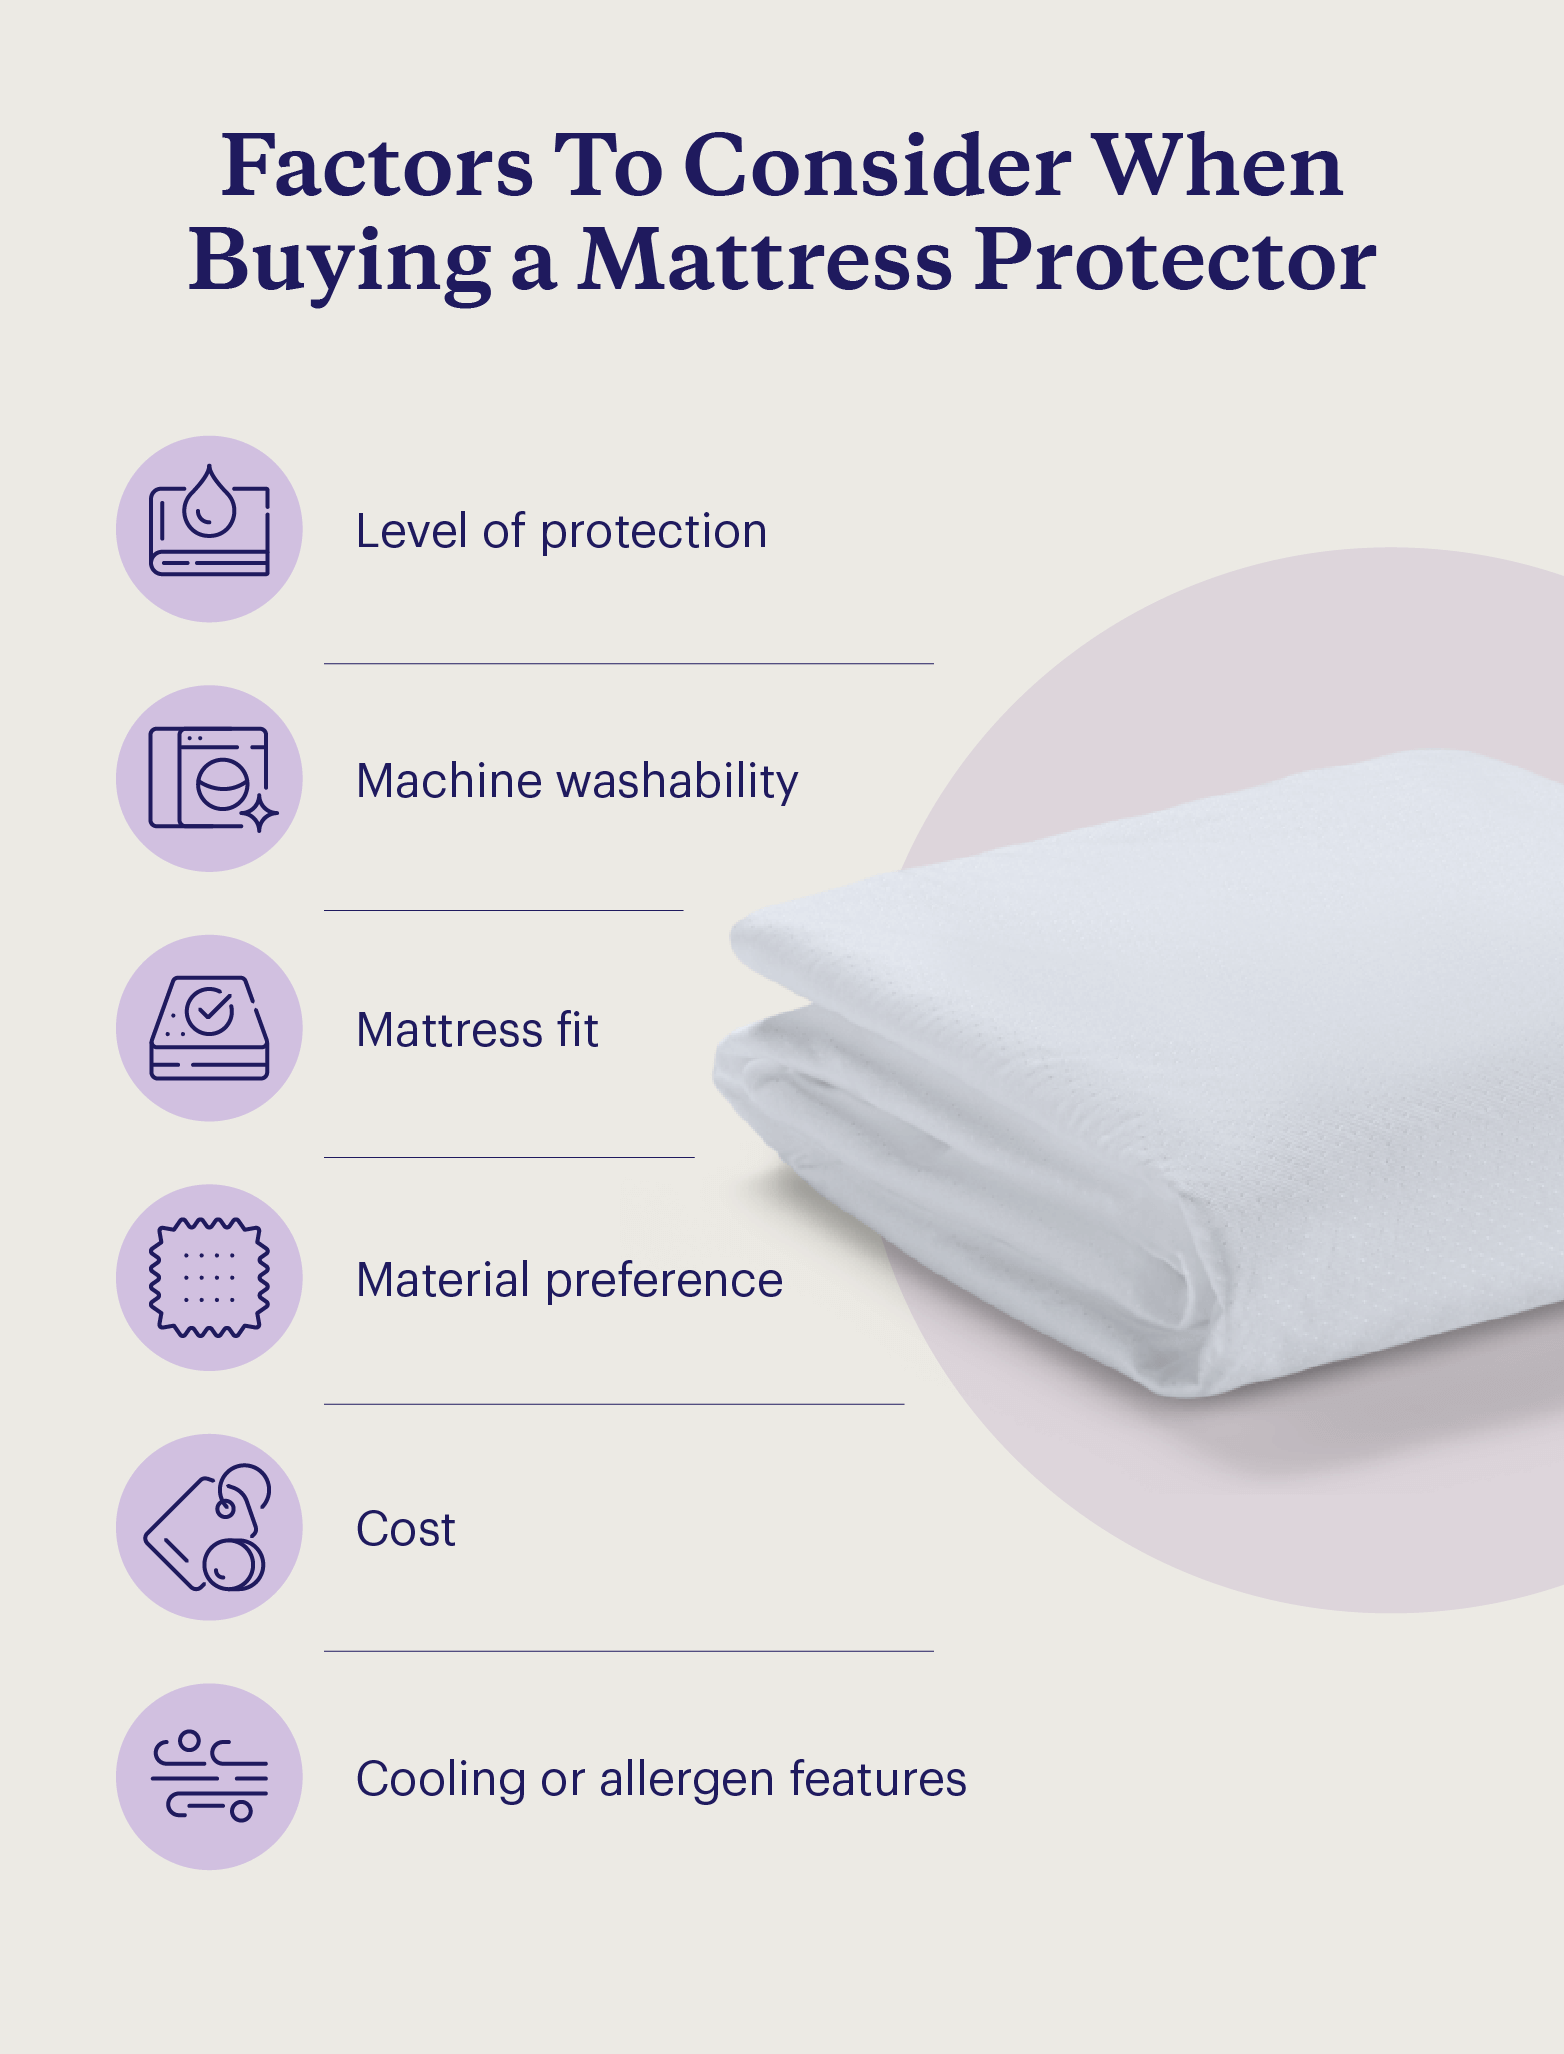 Graphic listing factors to consider when buying a mattress protector alongside an image of one.